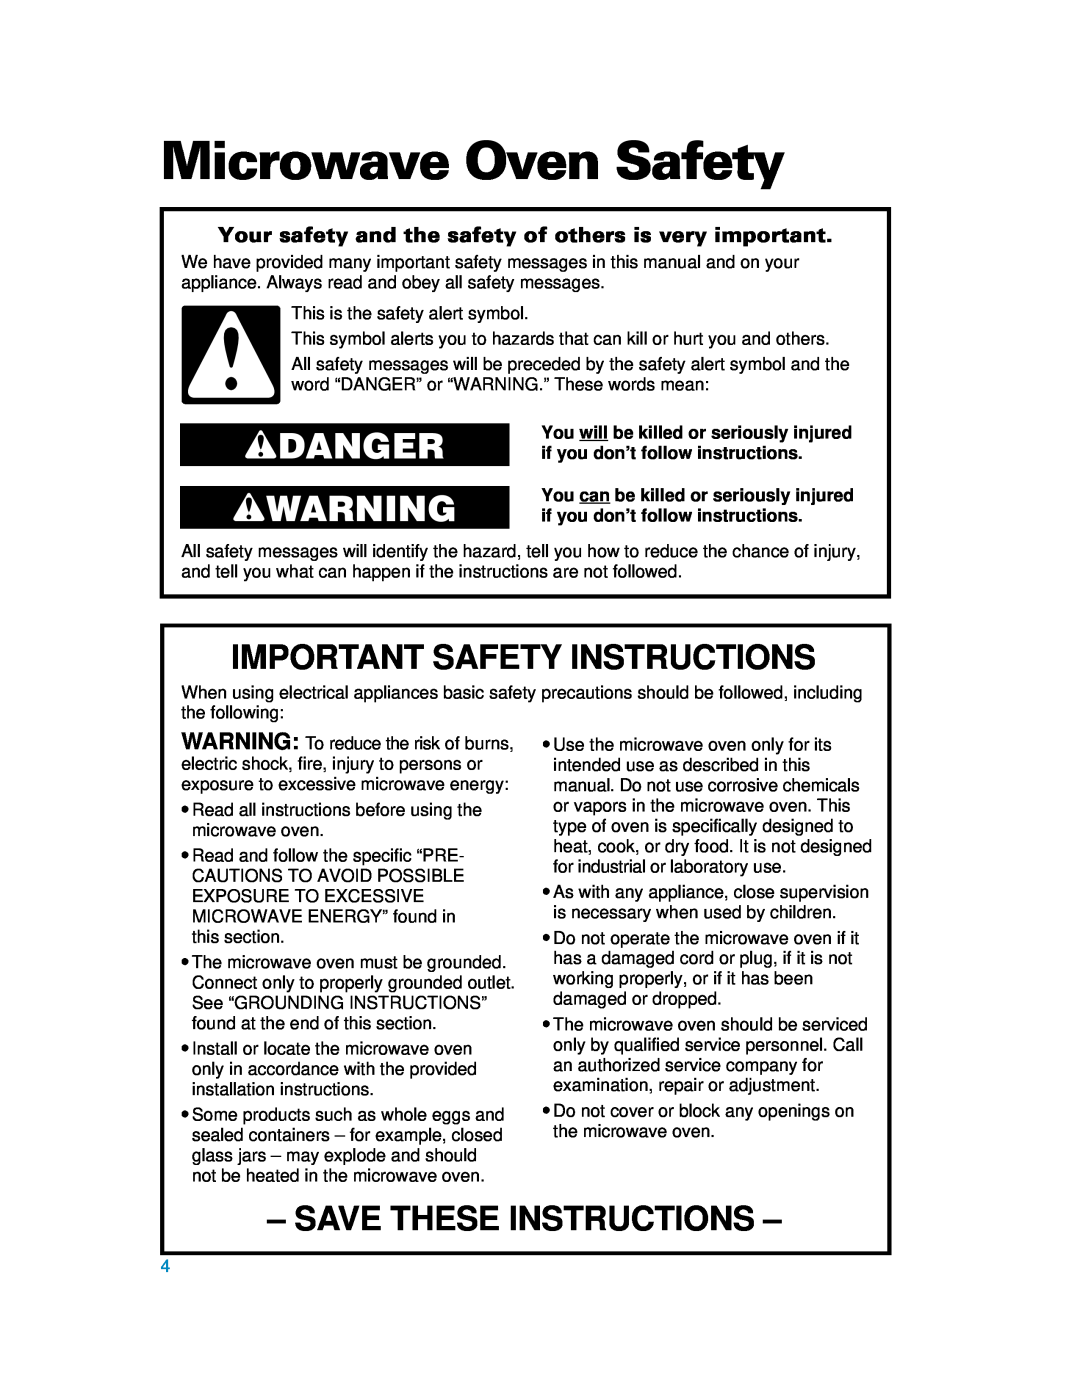 Whirlpool MH6130XE warranty Microwave Oven Safety, wDANGER wWARNING, Important Safety Instructions, Save These Instructions 